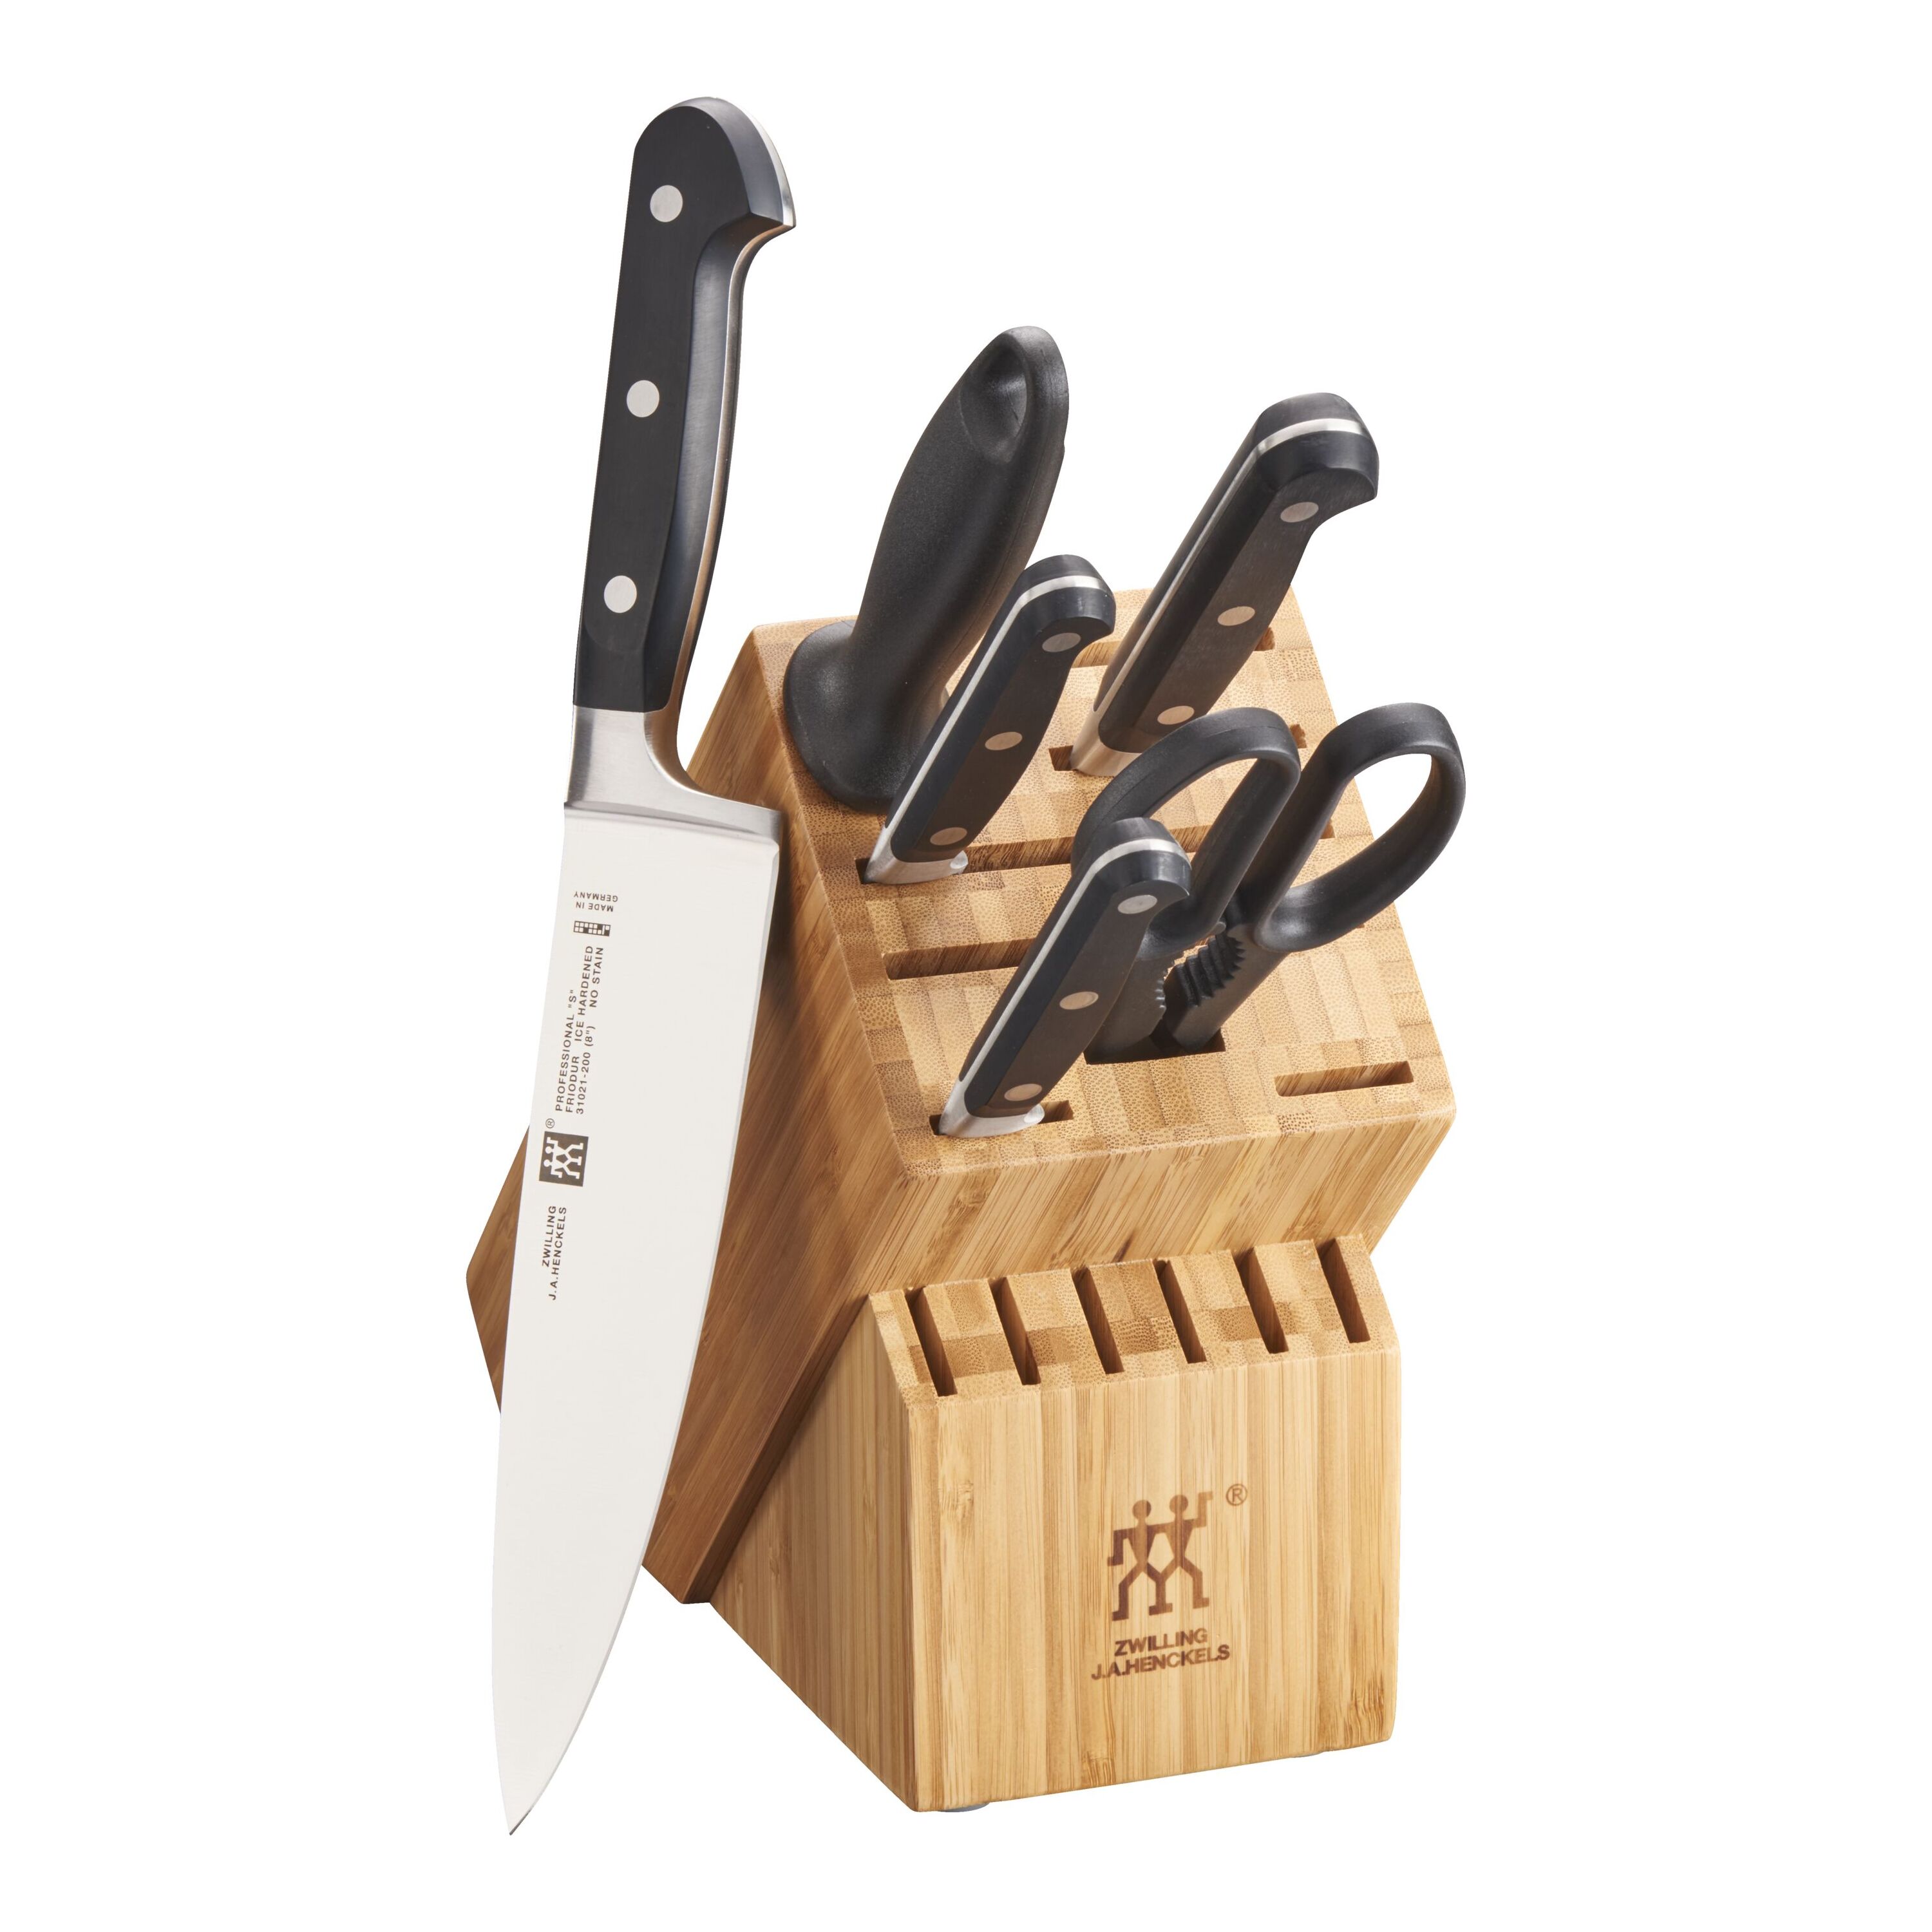 BEW 7 Piece Butchers Knife Set Red, Trade Prices